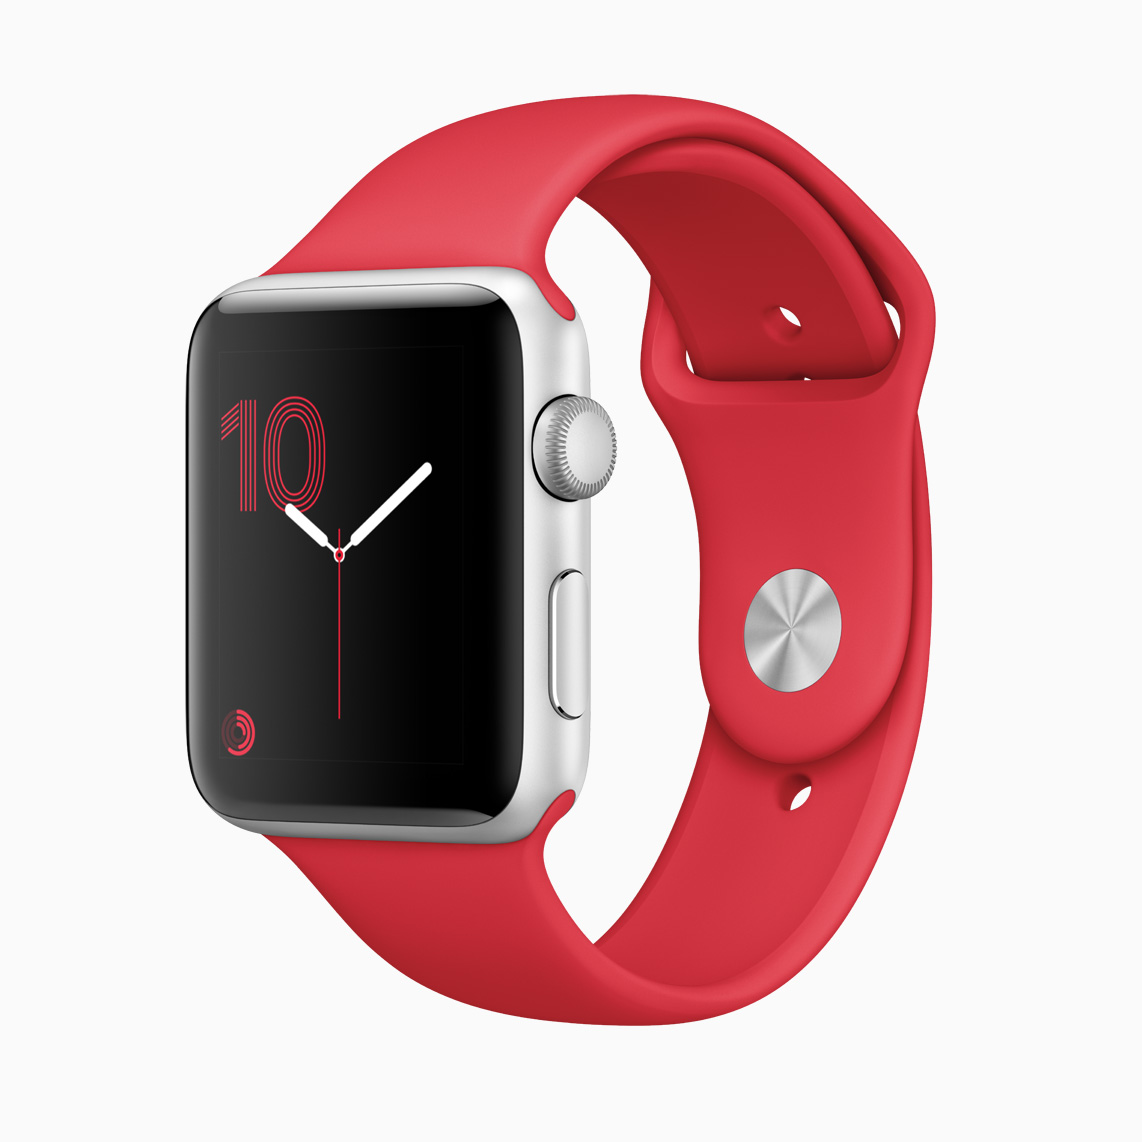 Apple Unveils Four New (RED) Products, Up to $1 Million Donation for World AIDS Day